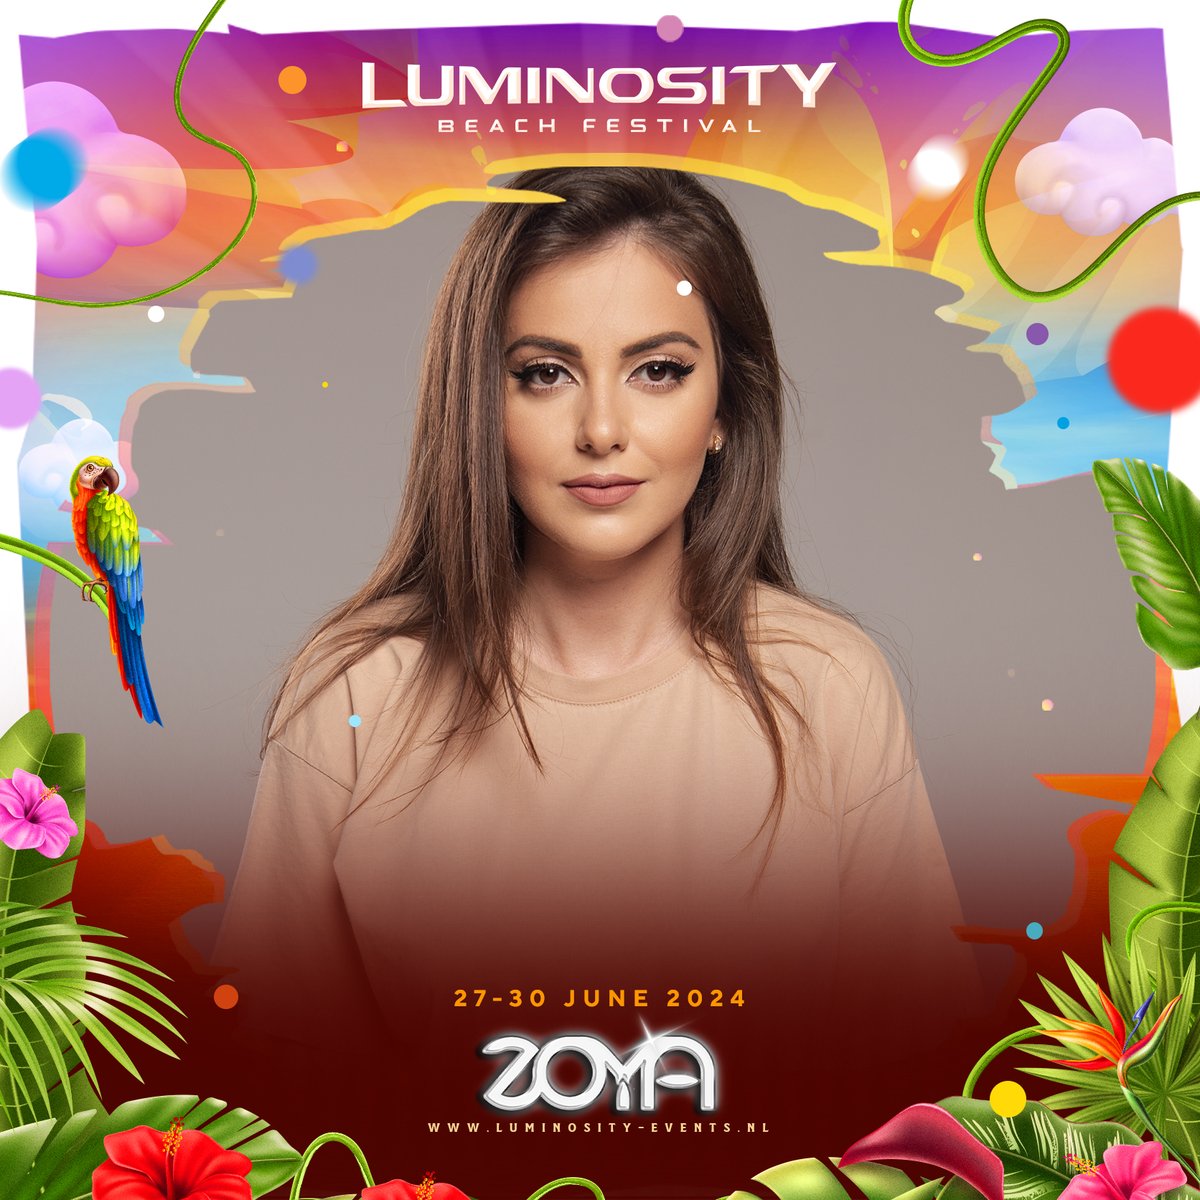 Festival gig announcement: I am happy to share with you that I will be playing at @LuminosityEvent in the Netherlands this year. My set will be on June 29th, from 14 till 15:30, Beachclub Bernies stage. I am looking forward to meeting you all there and have a really great time